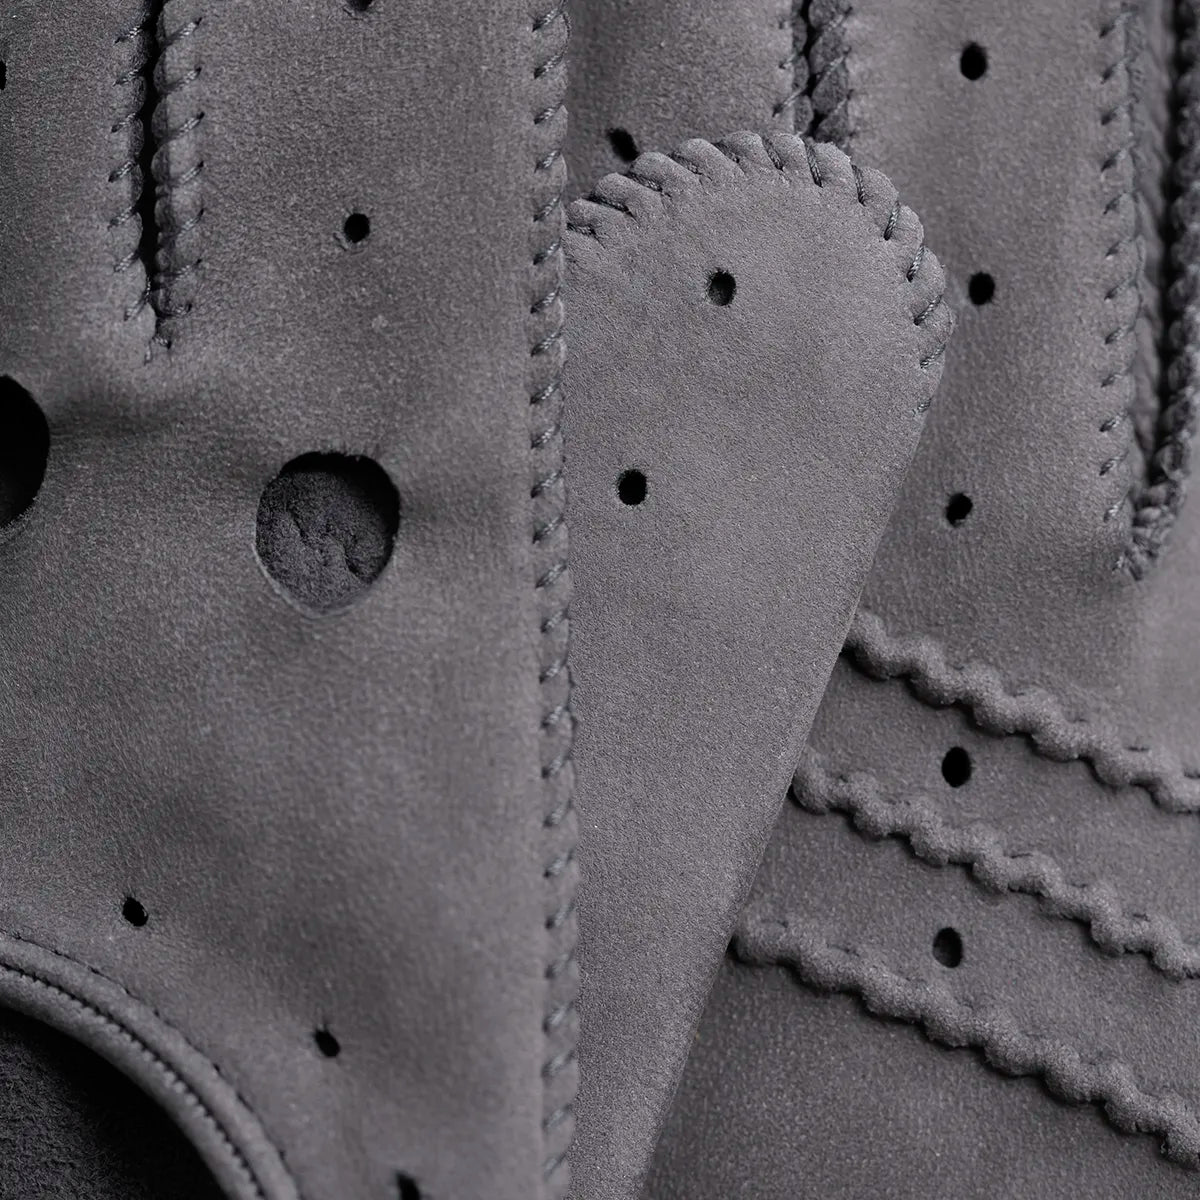 Driving Gloves in Suede Grey